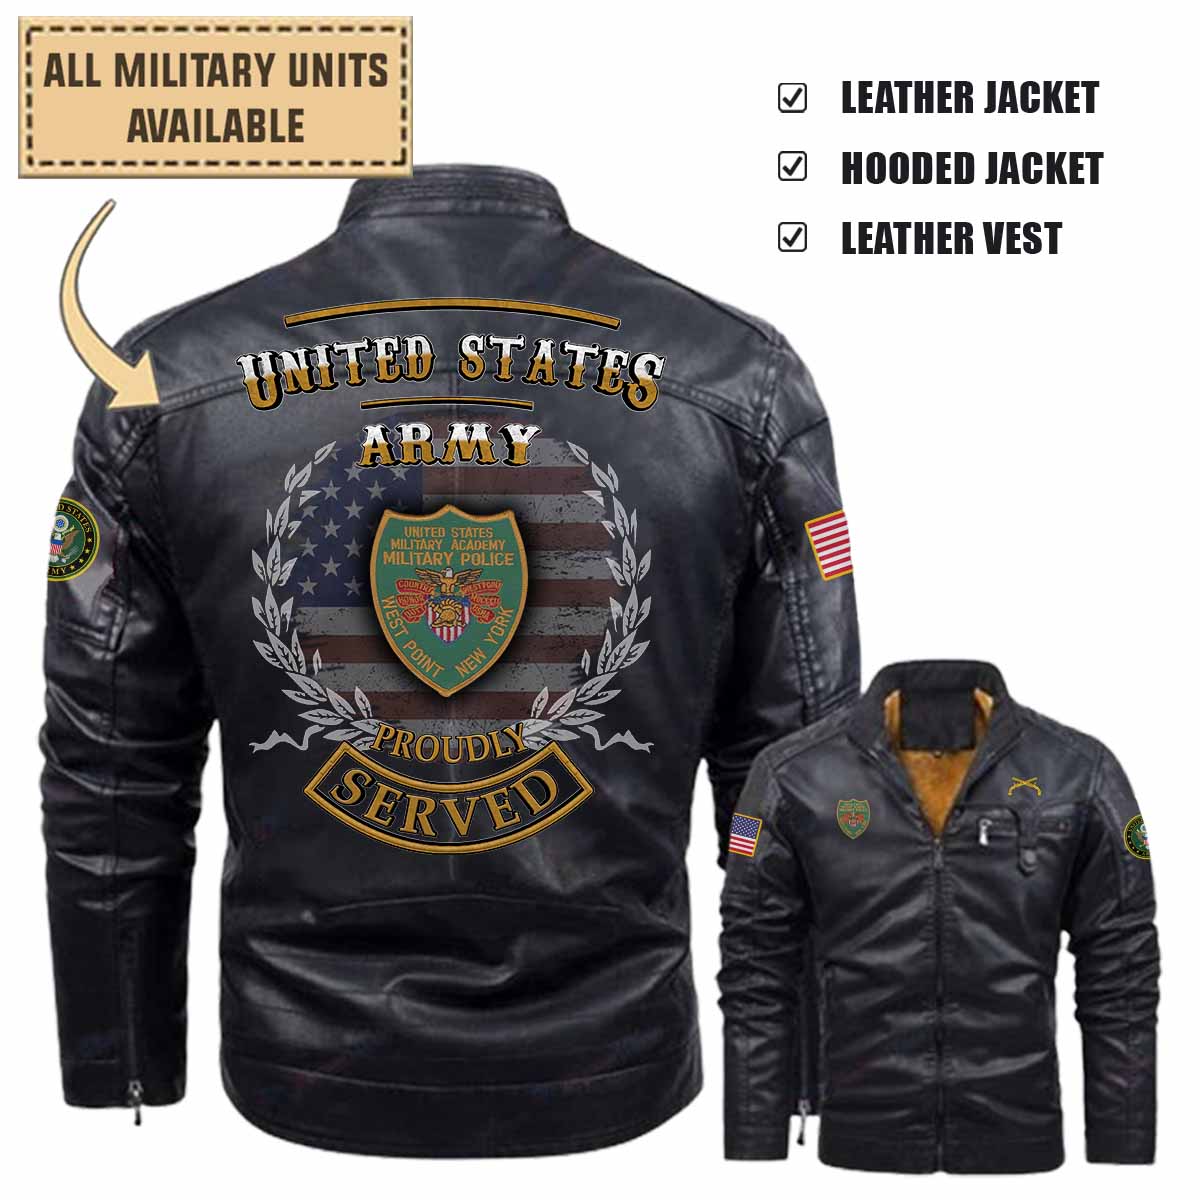 USMA Military Police West Point_Military Leather Jacket and Vest